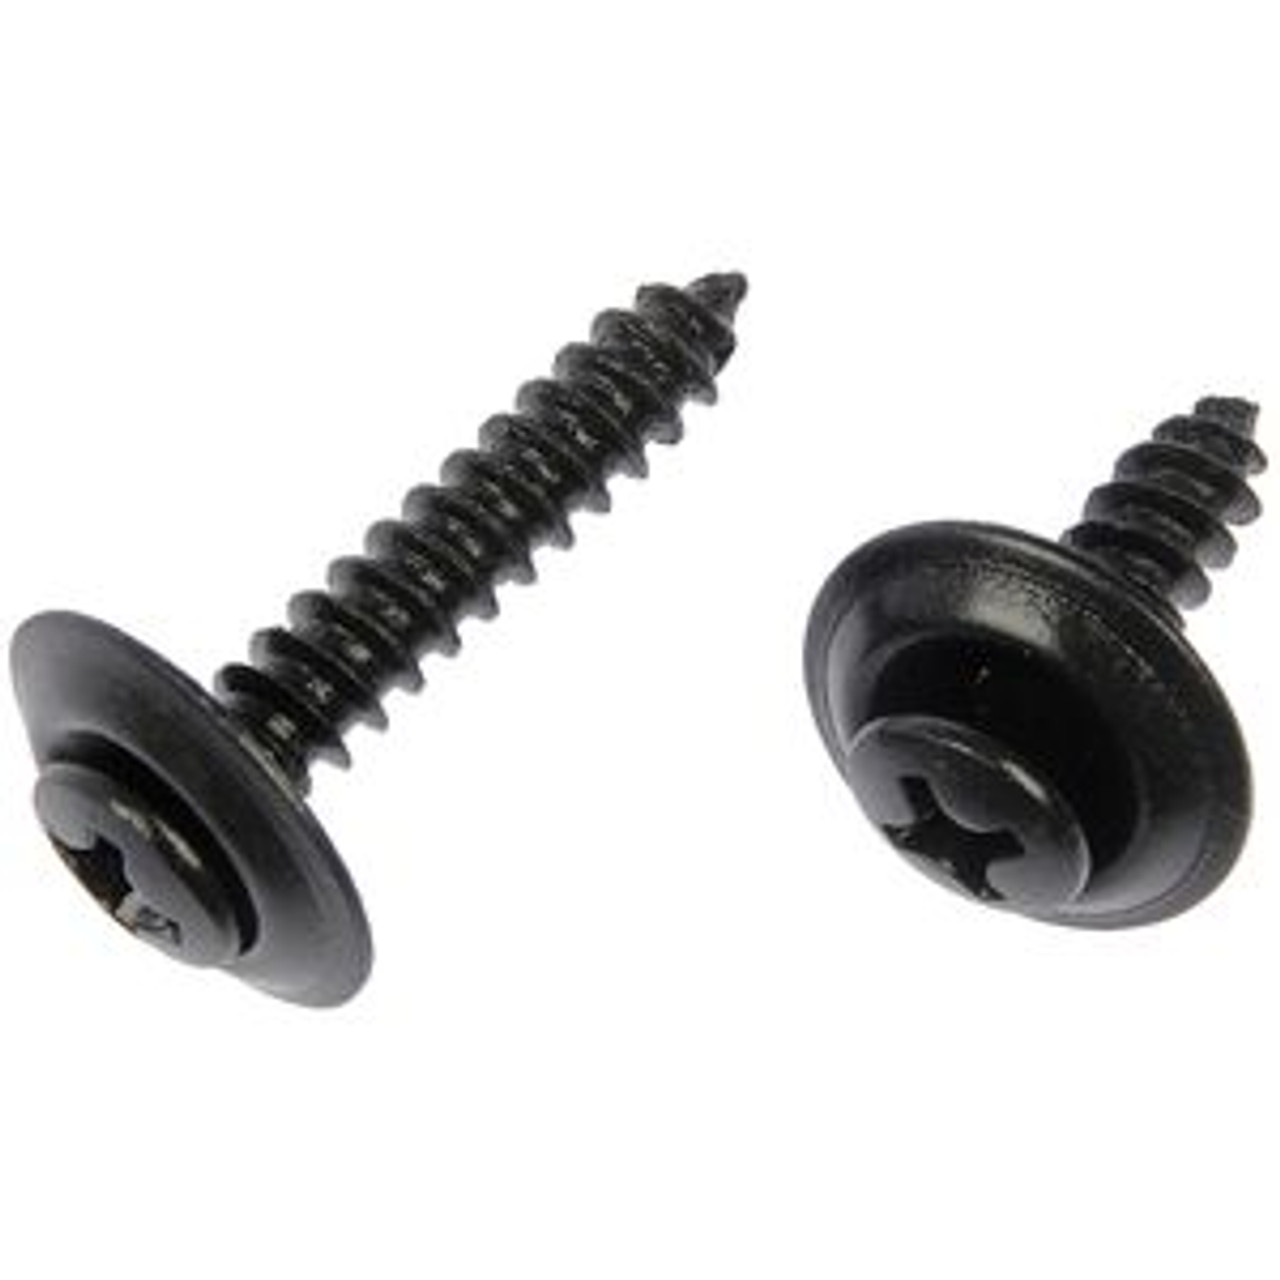 #6 x 5/8"
Phillips Oval Head Sems Tapping Screws
Countersunk Washer
Black Phosphate
100 Per Box